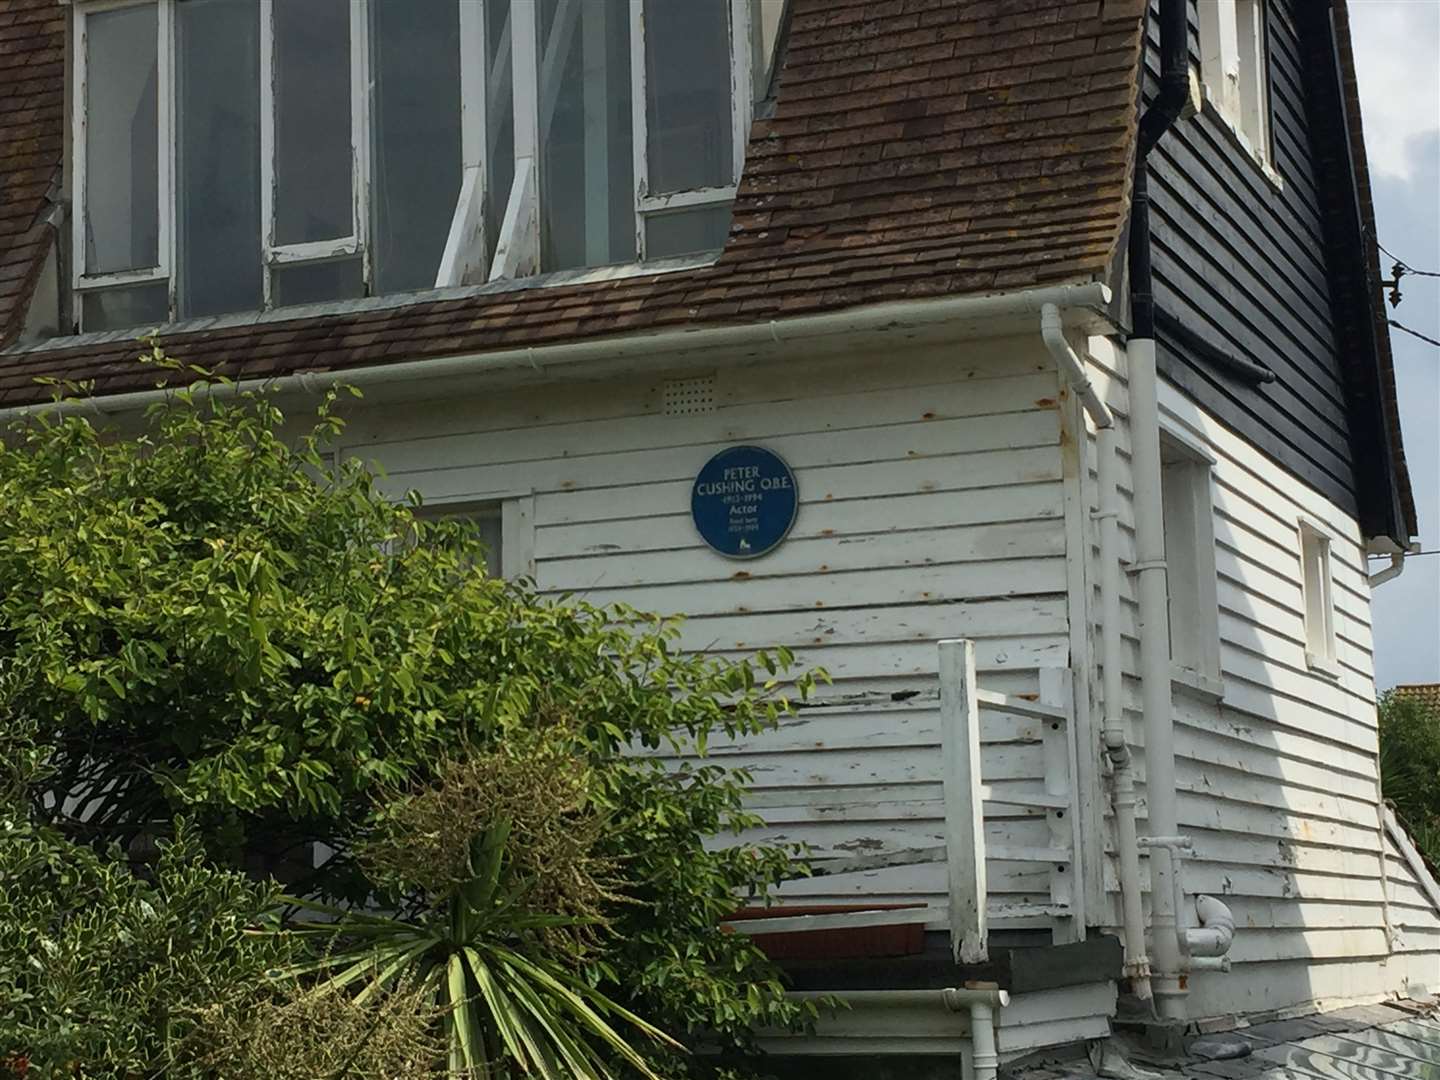 Star Wars and Hammer Horror actor Peter Cushing's former home near Island Wall in Whitstable